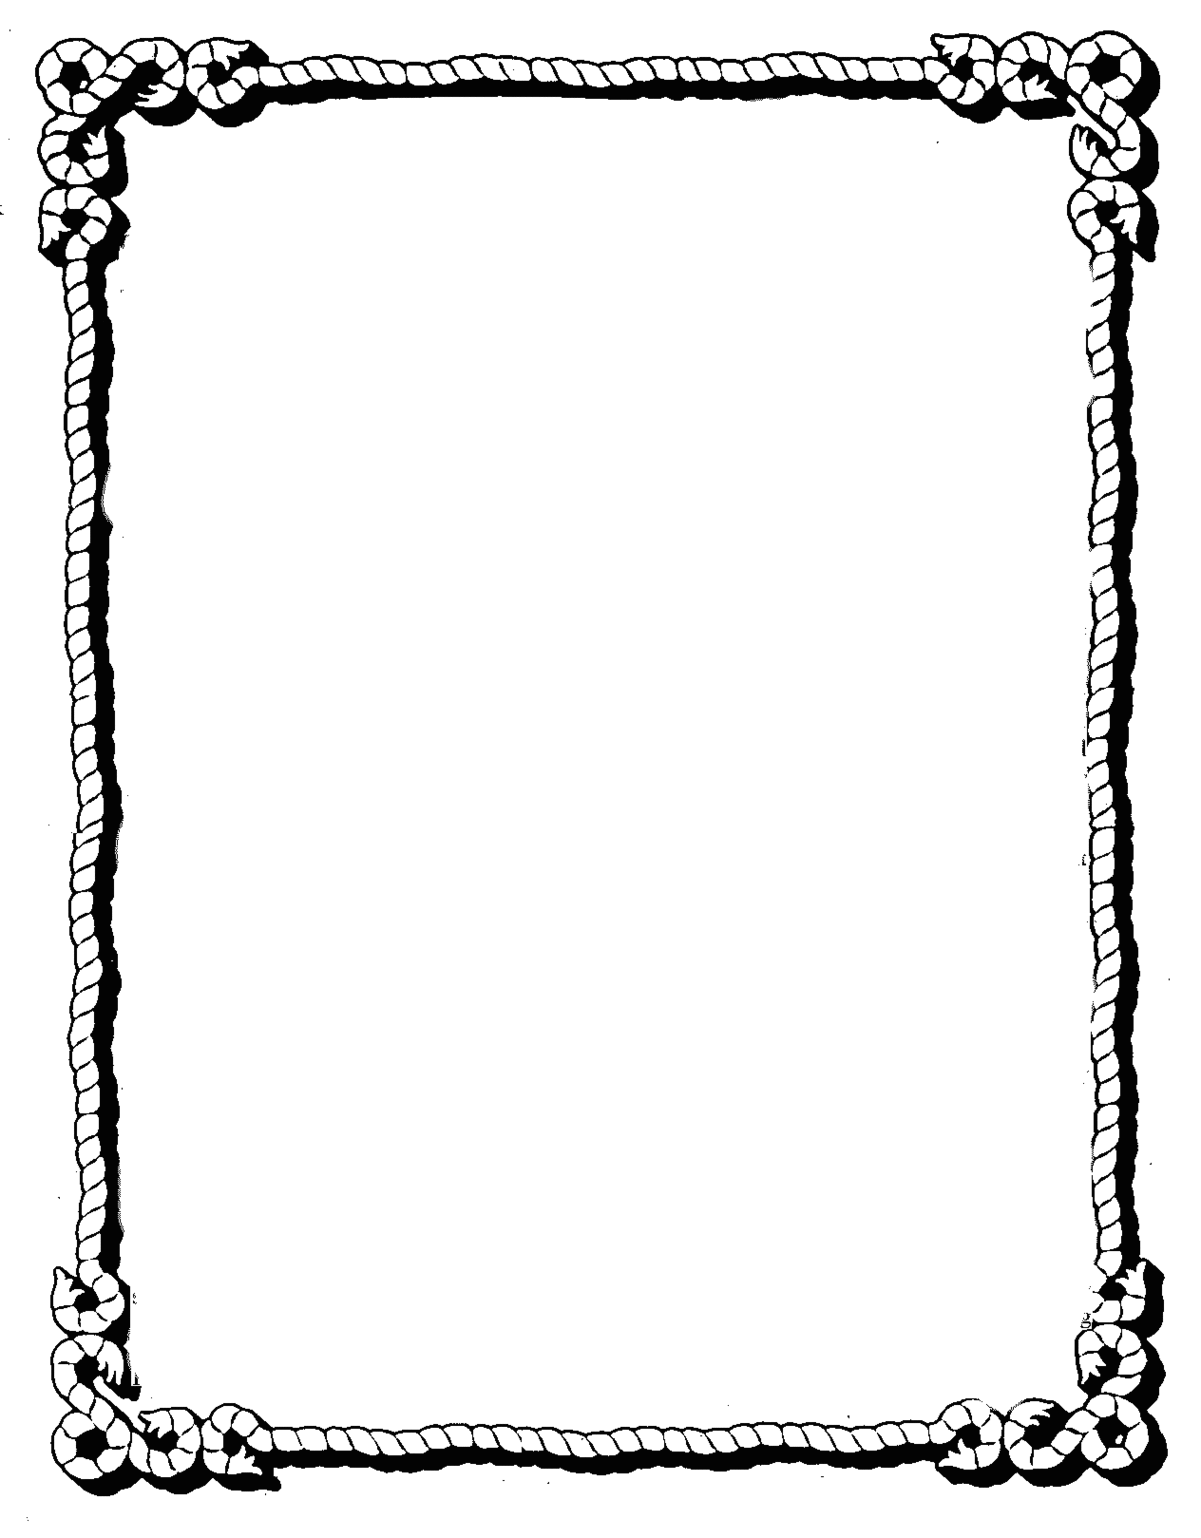 Free Page Border Designs Clipart - Free to use Clip Art Resource